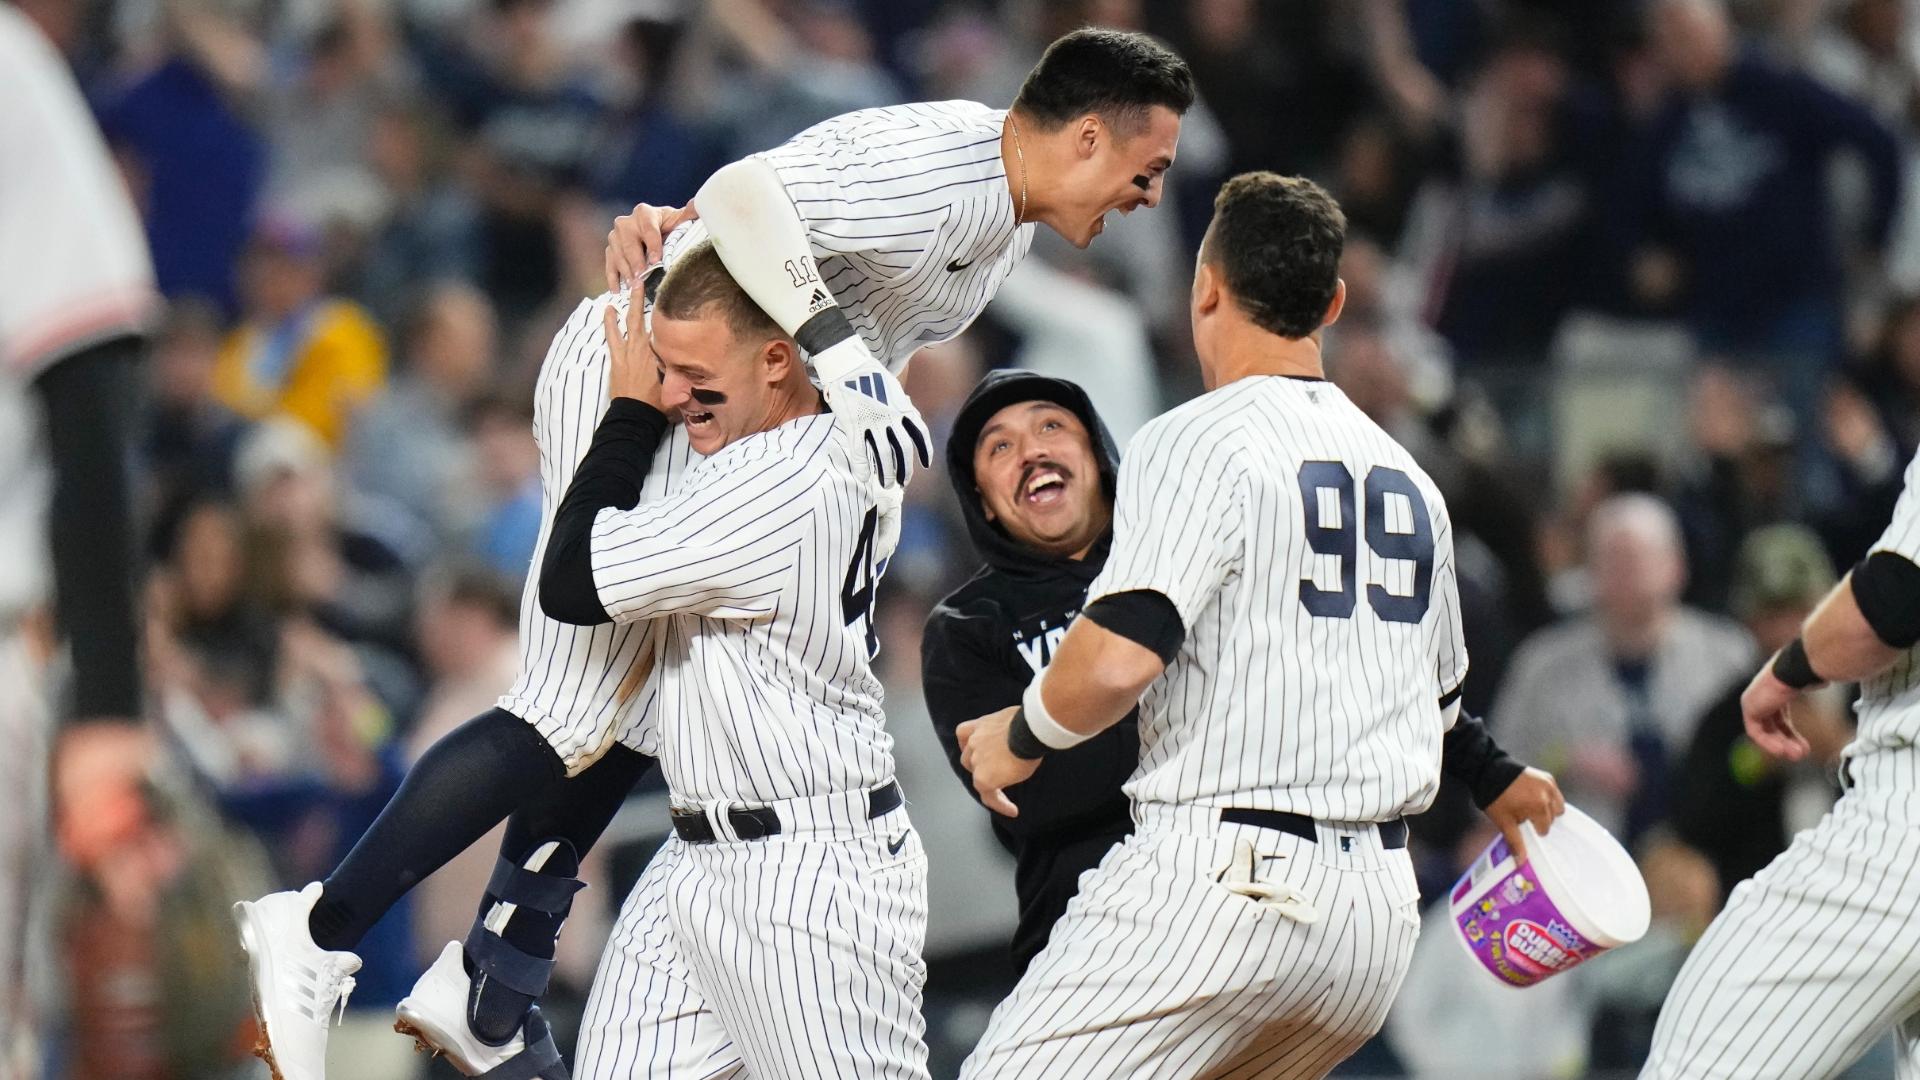 Judge hits tying HR in 9th, Volpe wins it in 10th as Yankees rally past  Orioles 6-5 - ABC7 New York